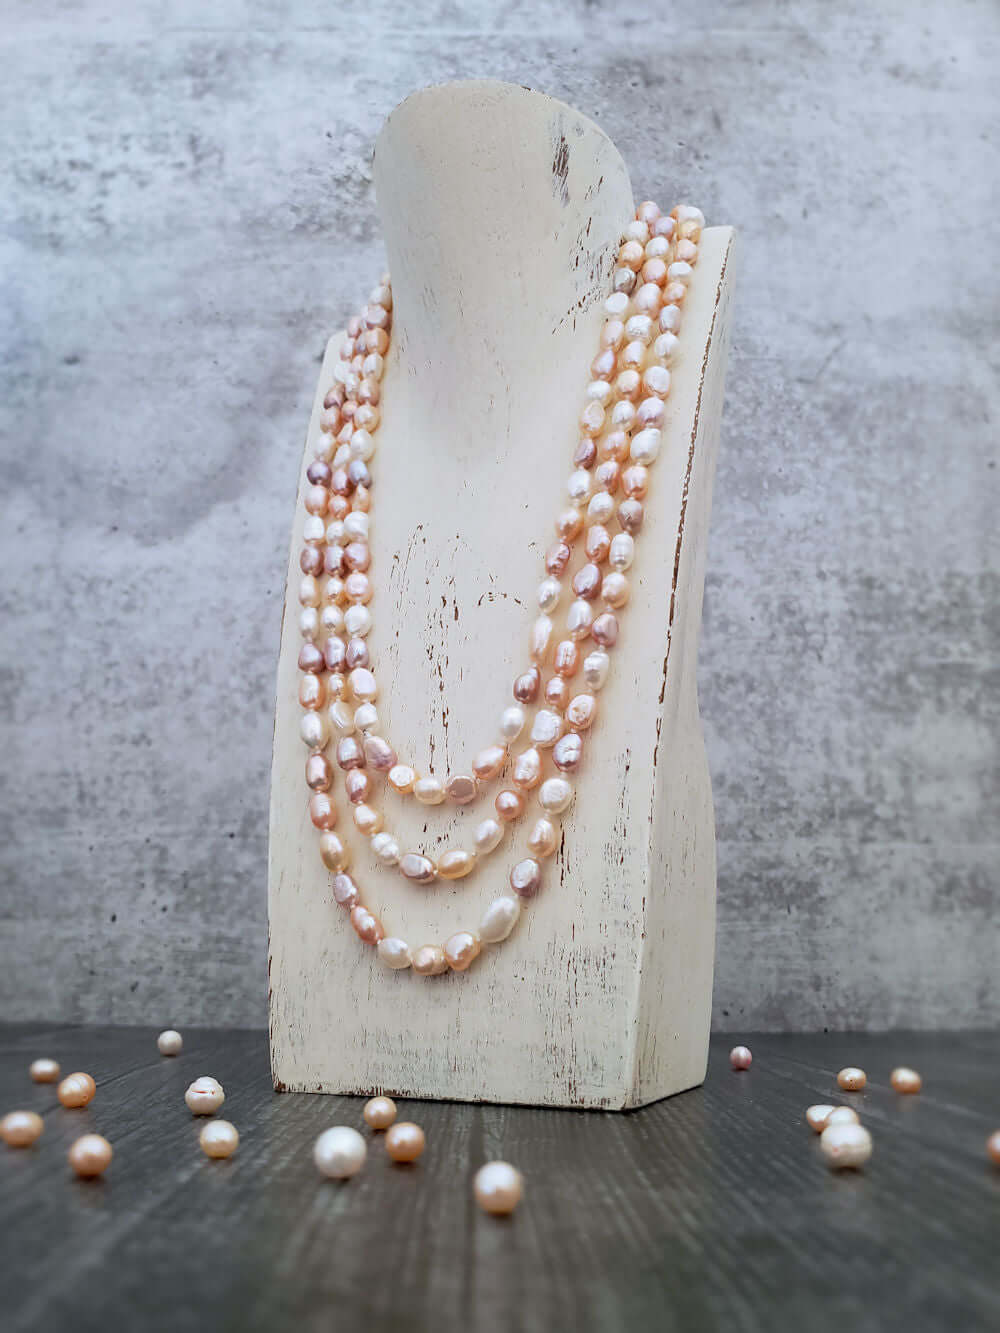 Pearl Necklace Collection at Summer Indigo